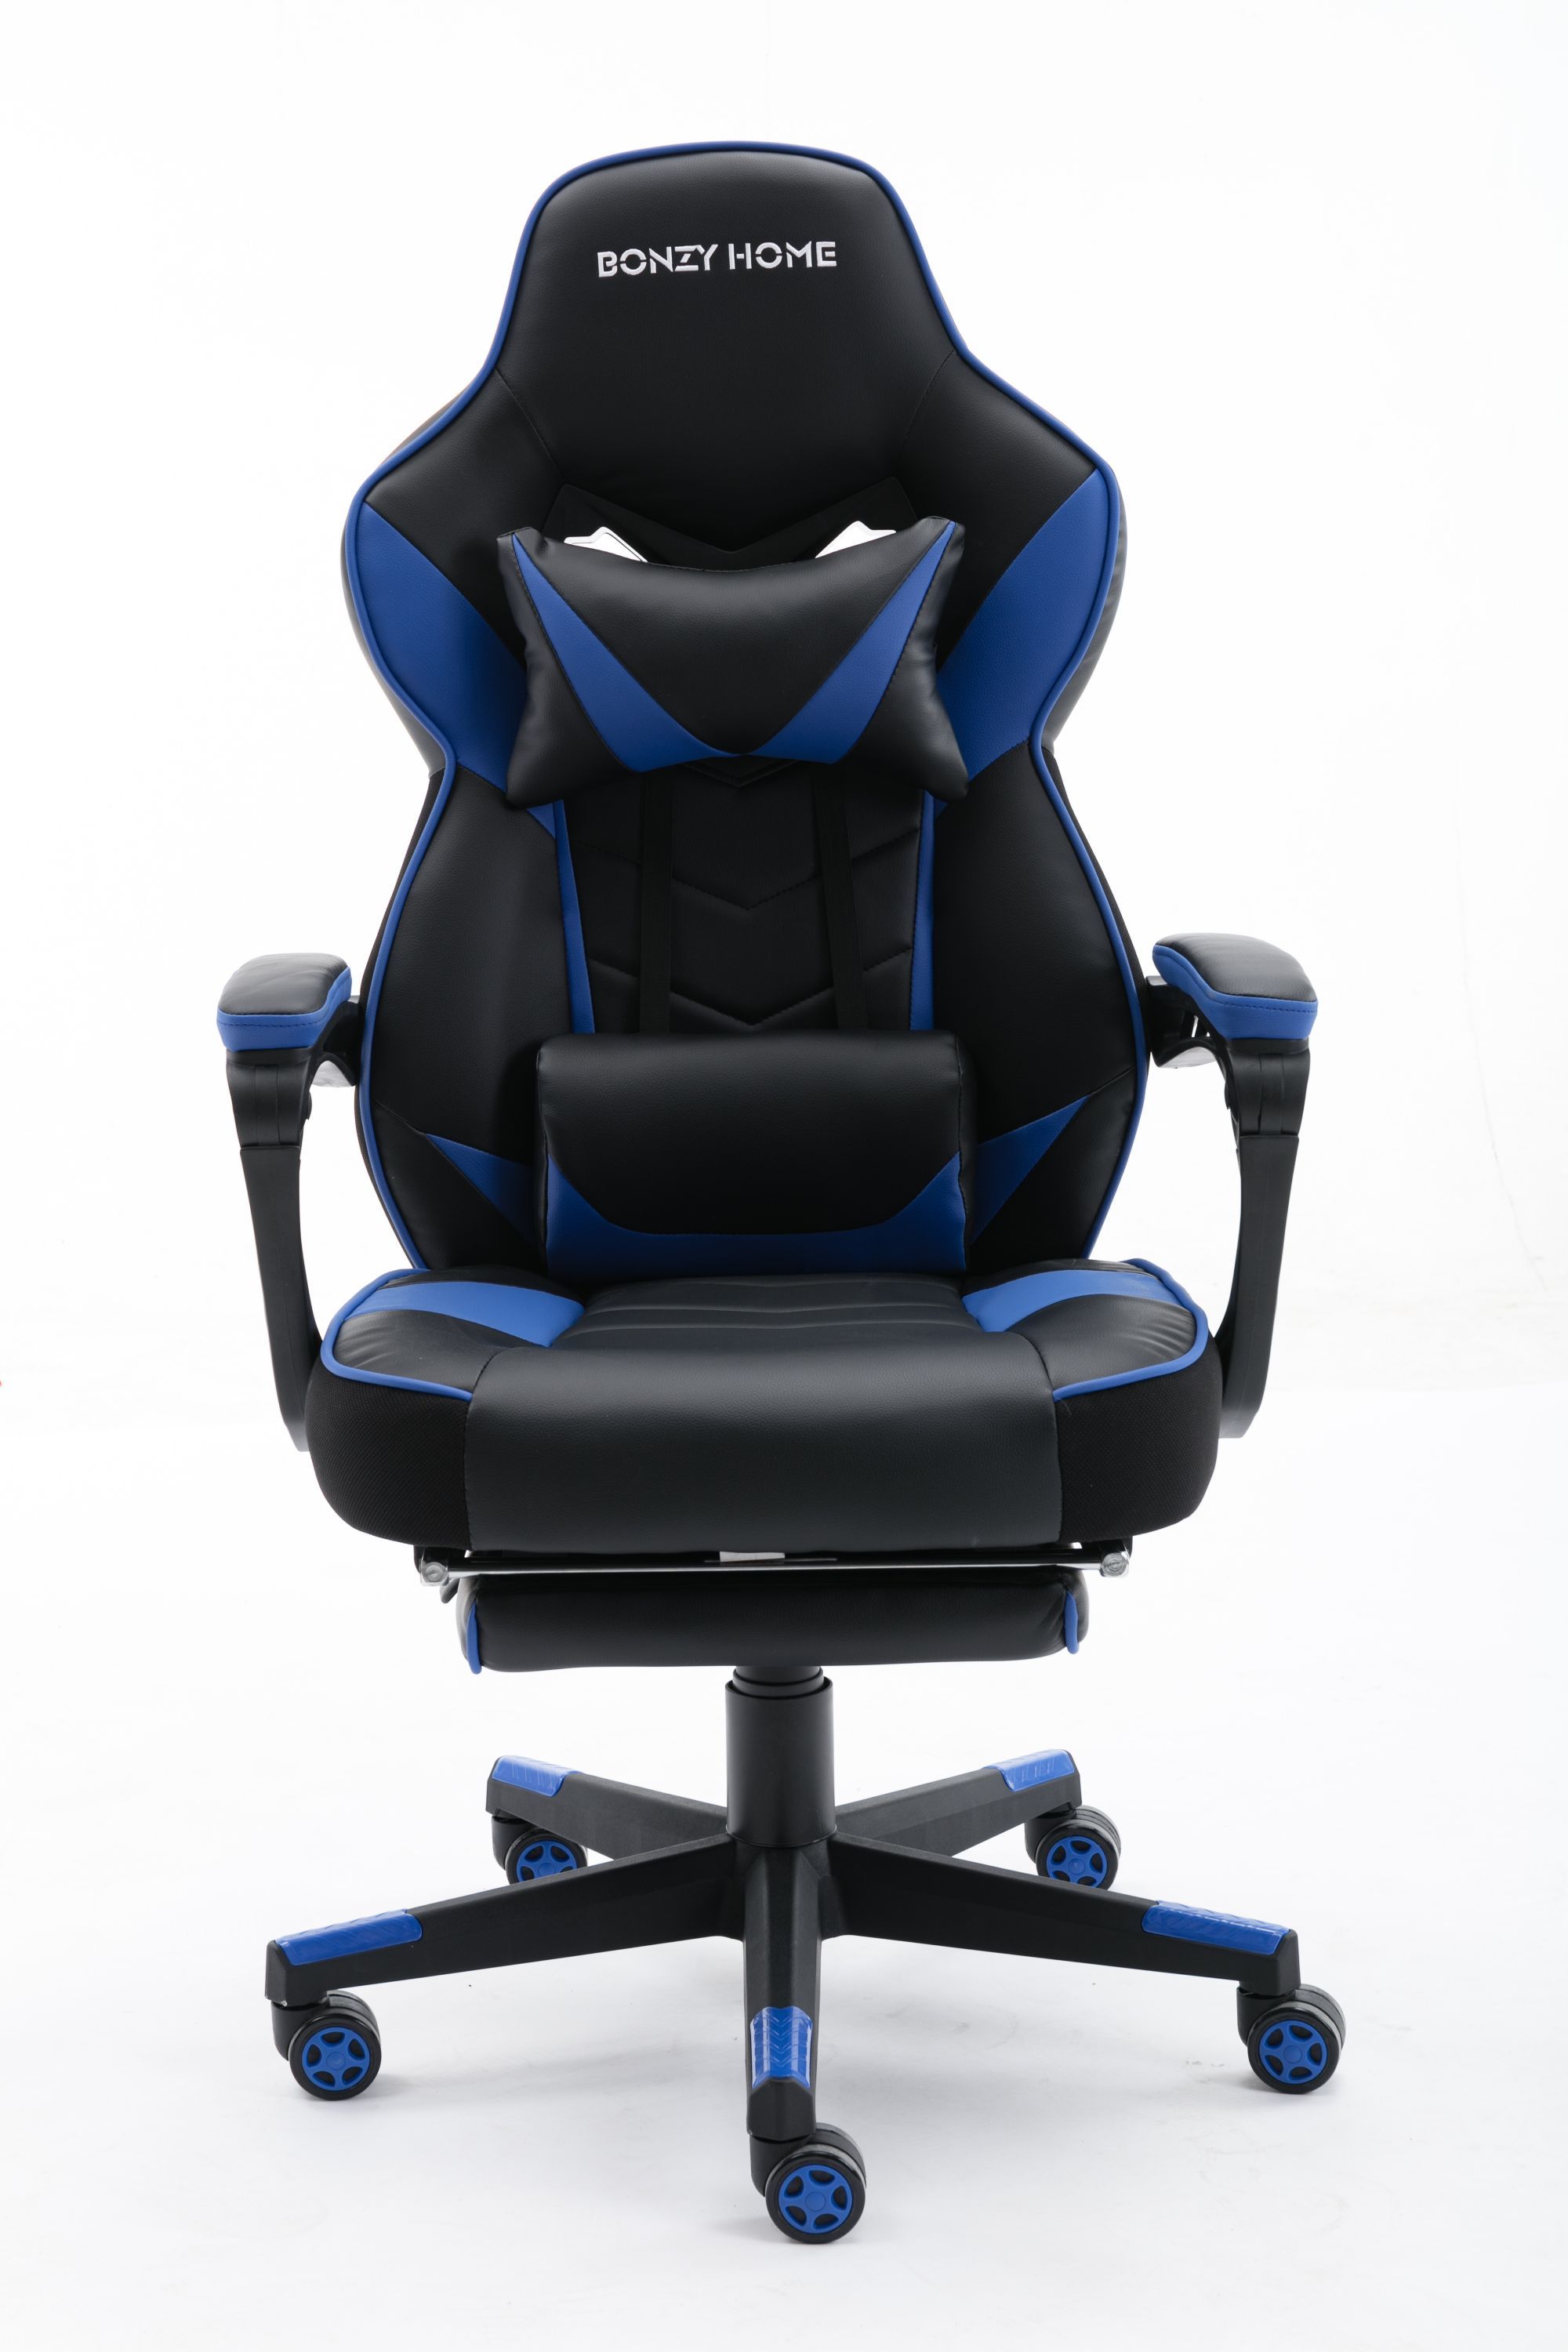 Details about   SWIVEL GAMING RACING CHAIR COMPUTER DESK OFFICE EXECUTIVE PU LEATHER ARMCHAIR 